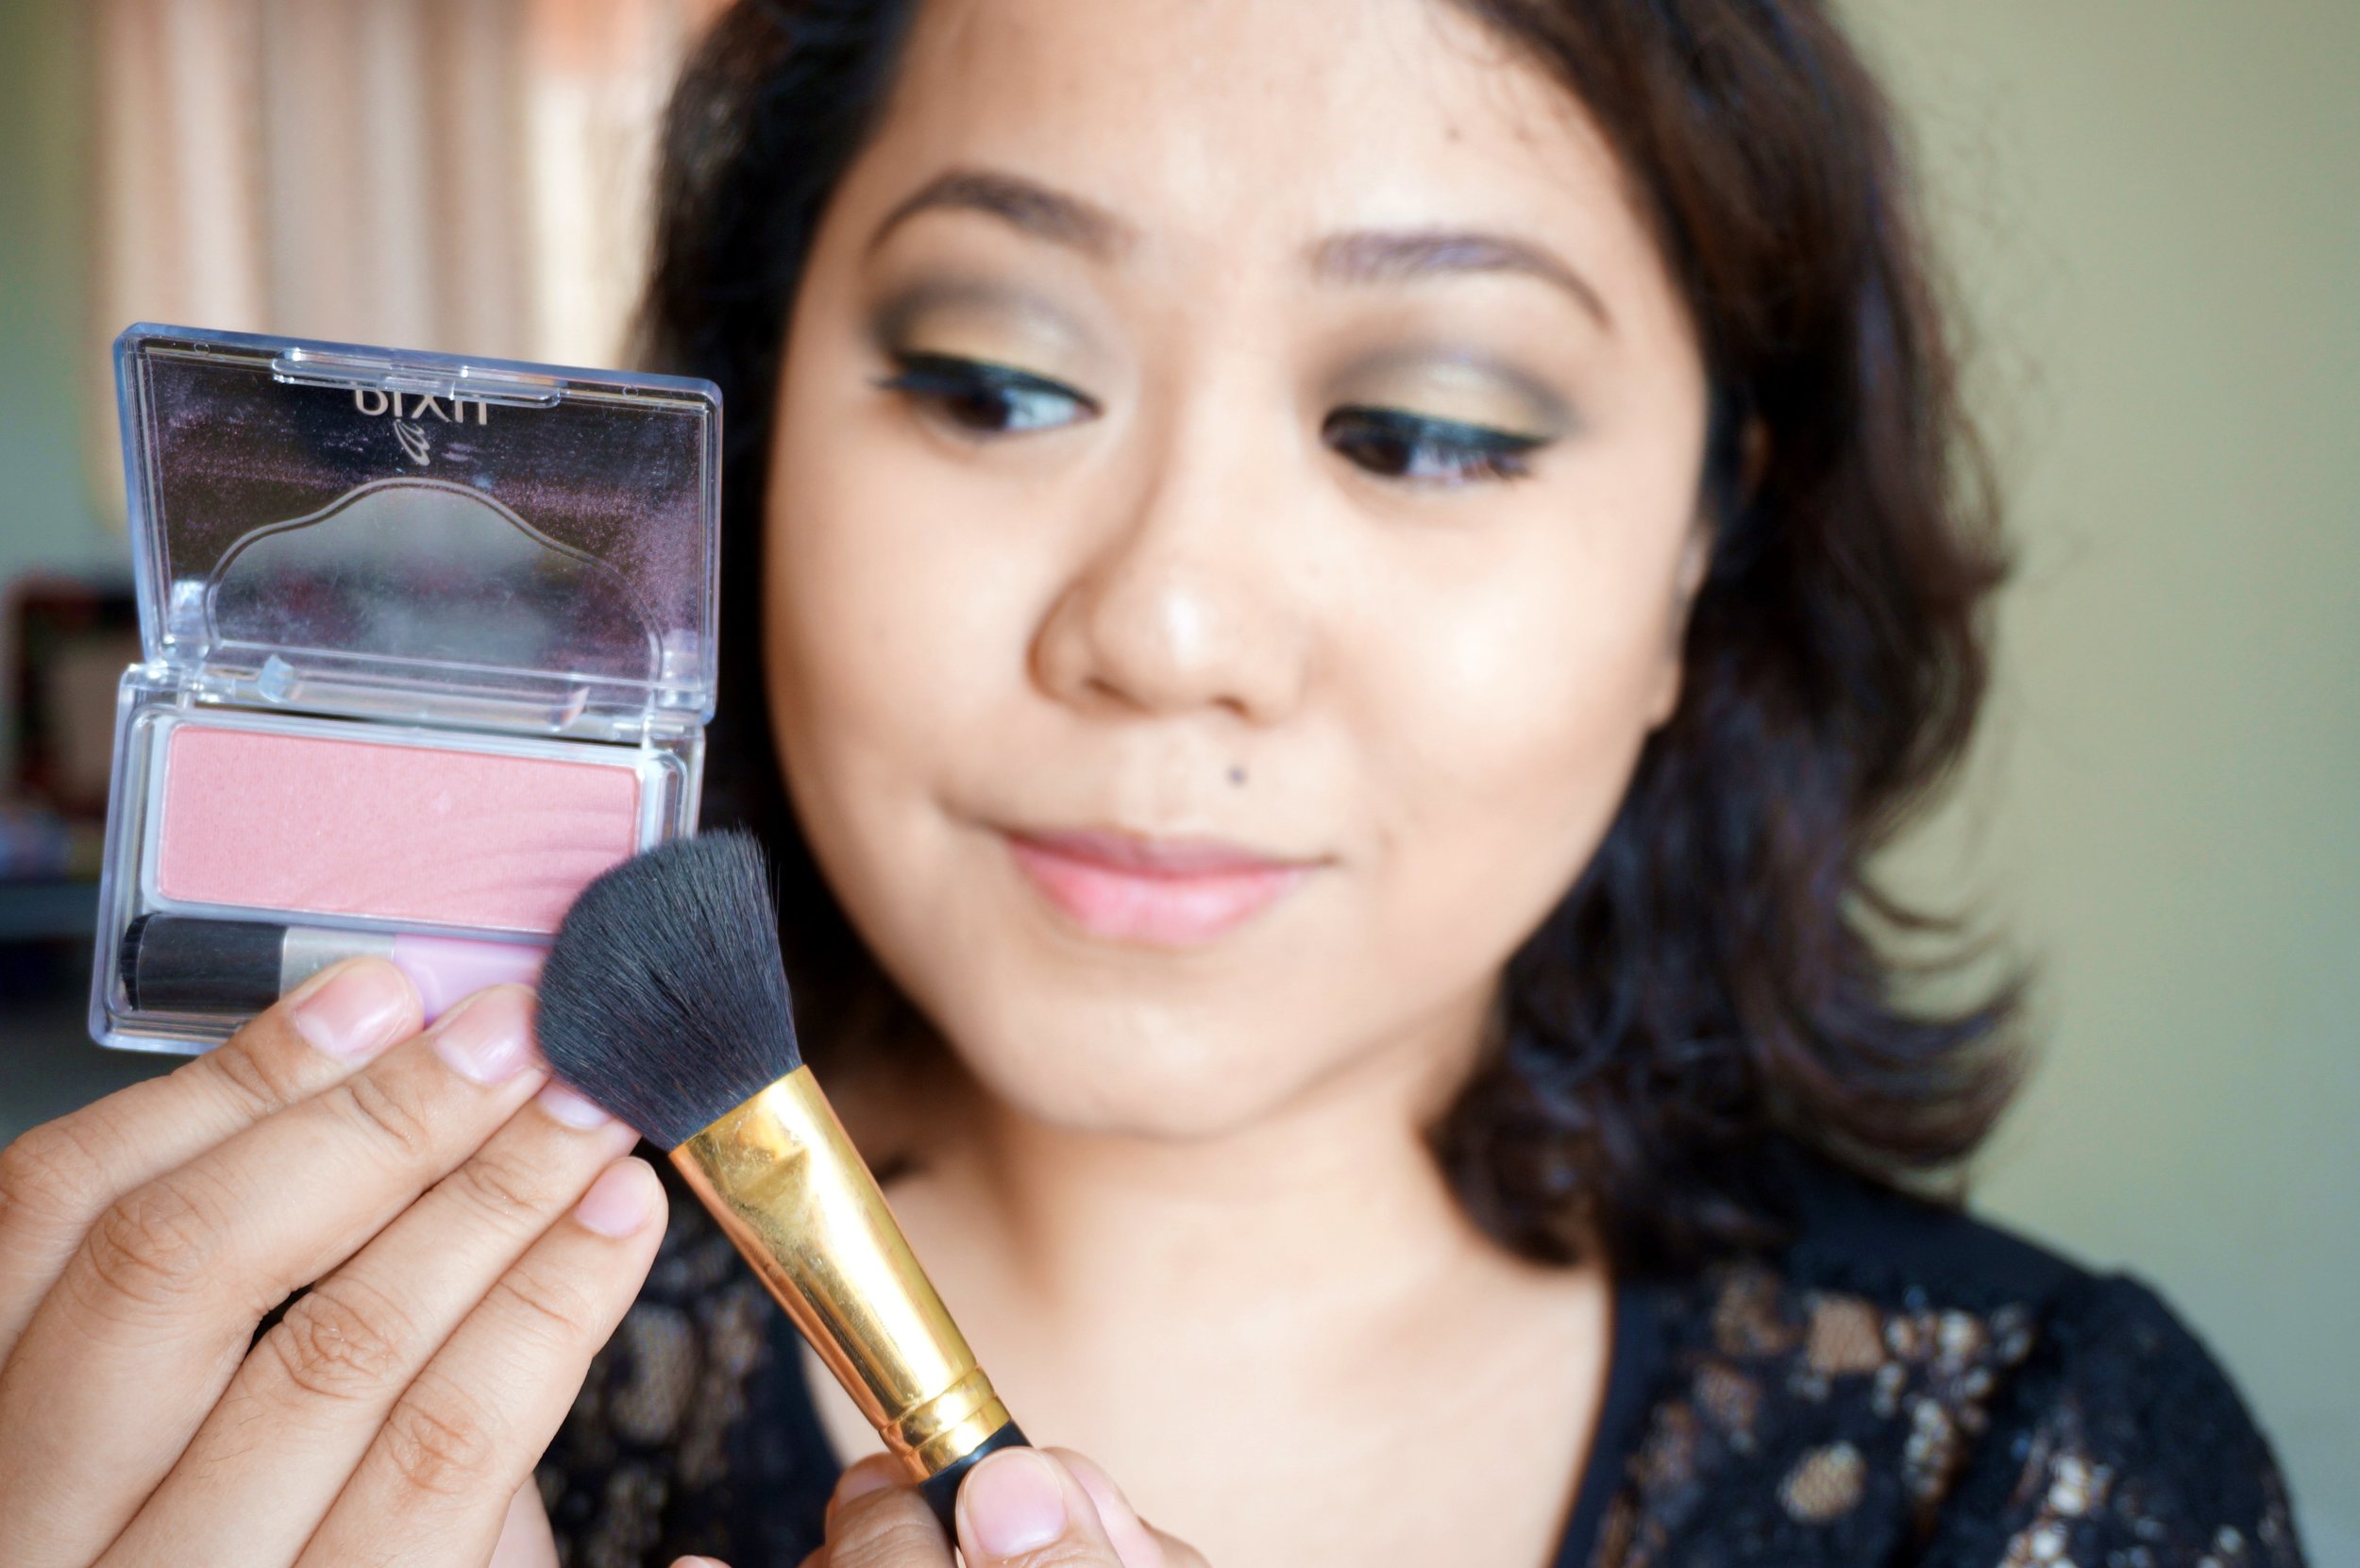  Step 12: Layer on the Pixy Passion Roses Brush (P285) on the apples of your cheeks. This gives a natural flush with just a&nbsp;hint of shimmer. It's very pretty and understated! 